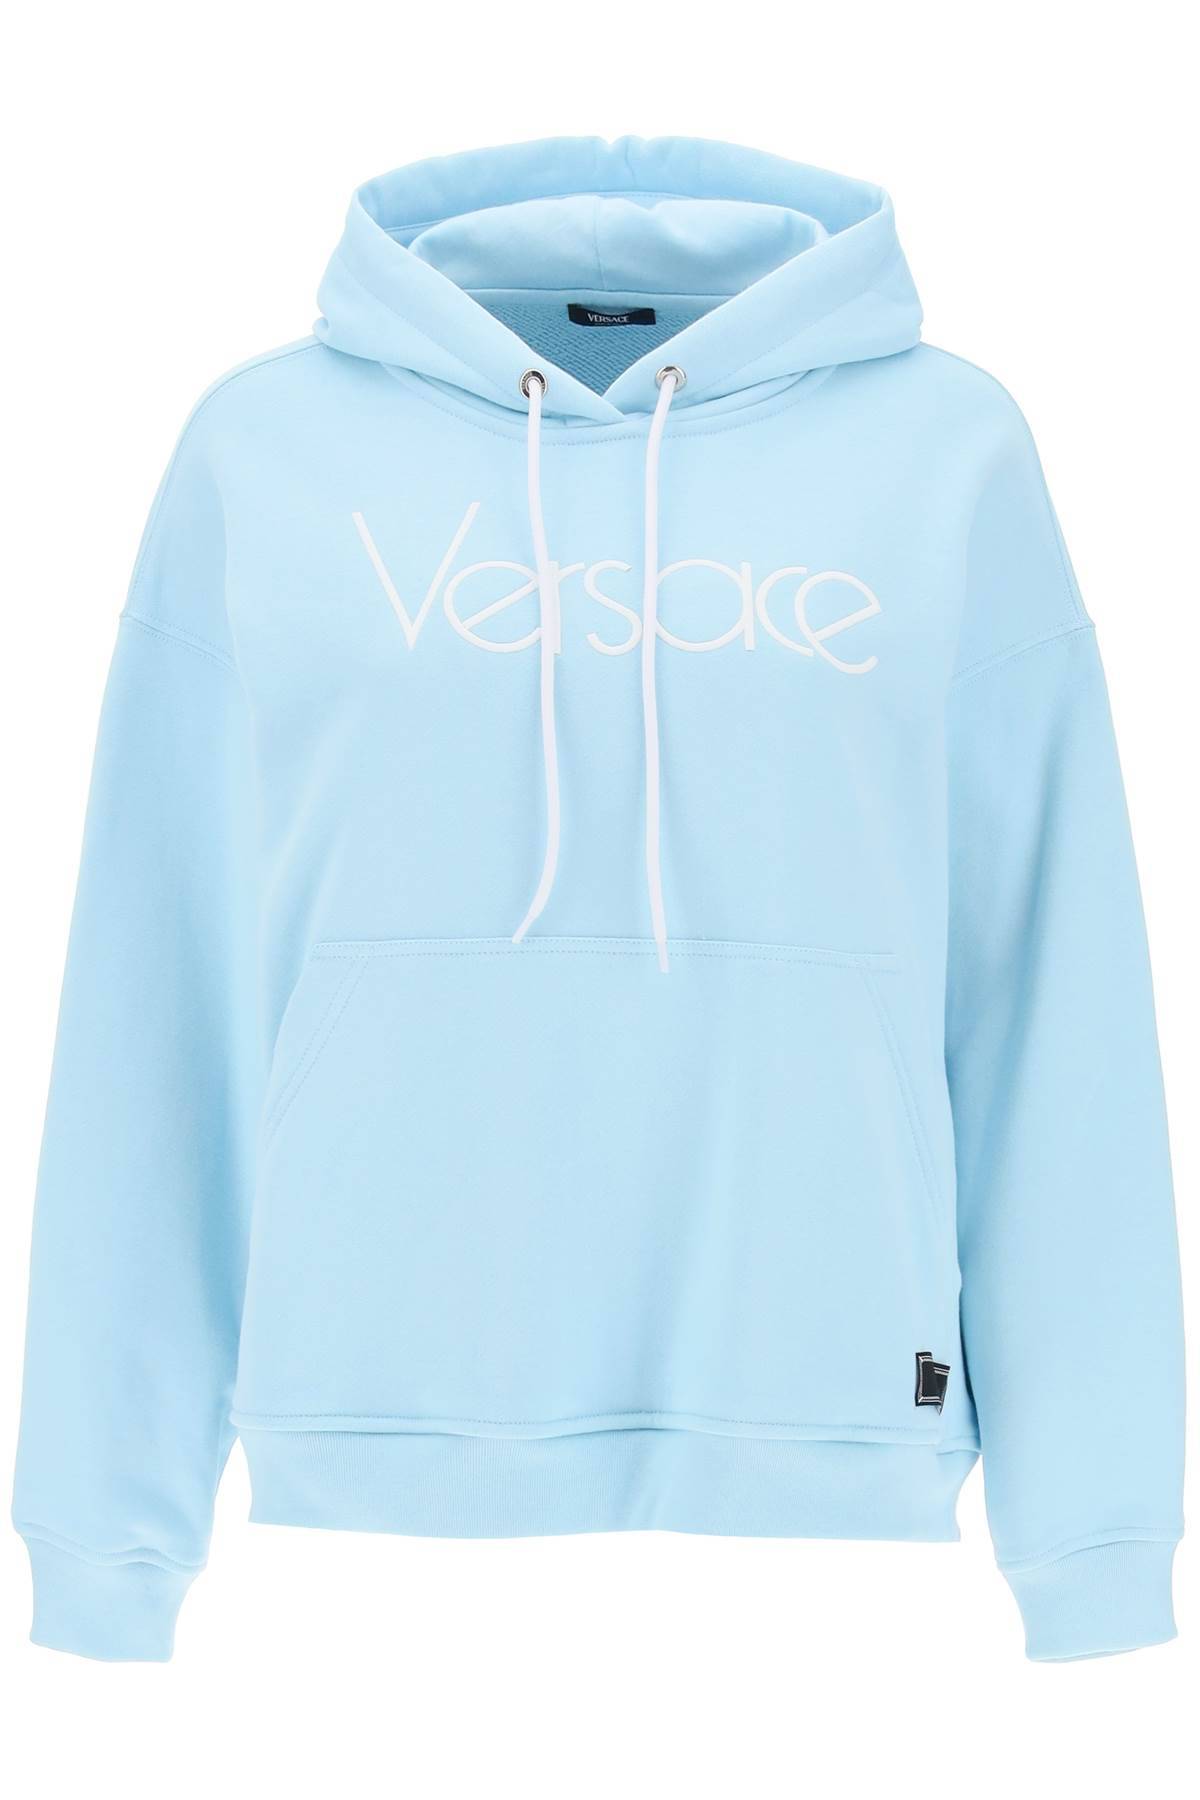 Versace VERSACE hoodie with 1978 re-edition logo